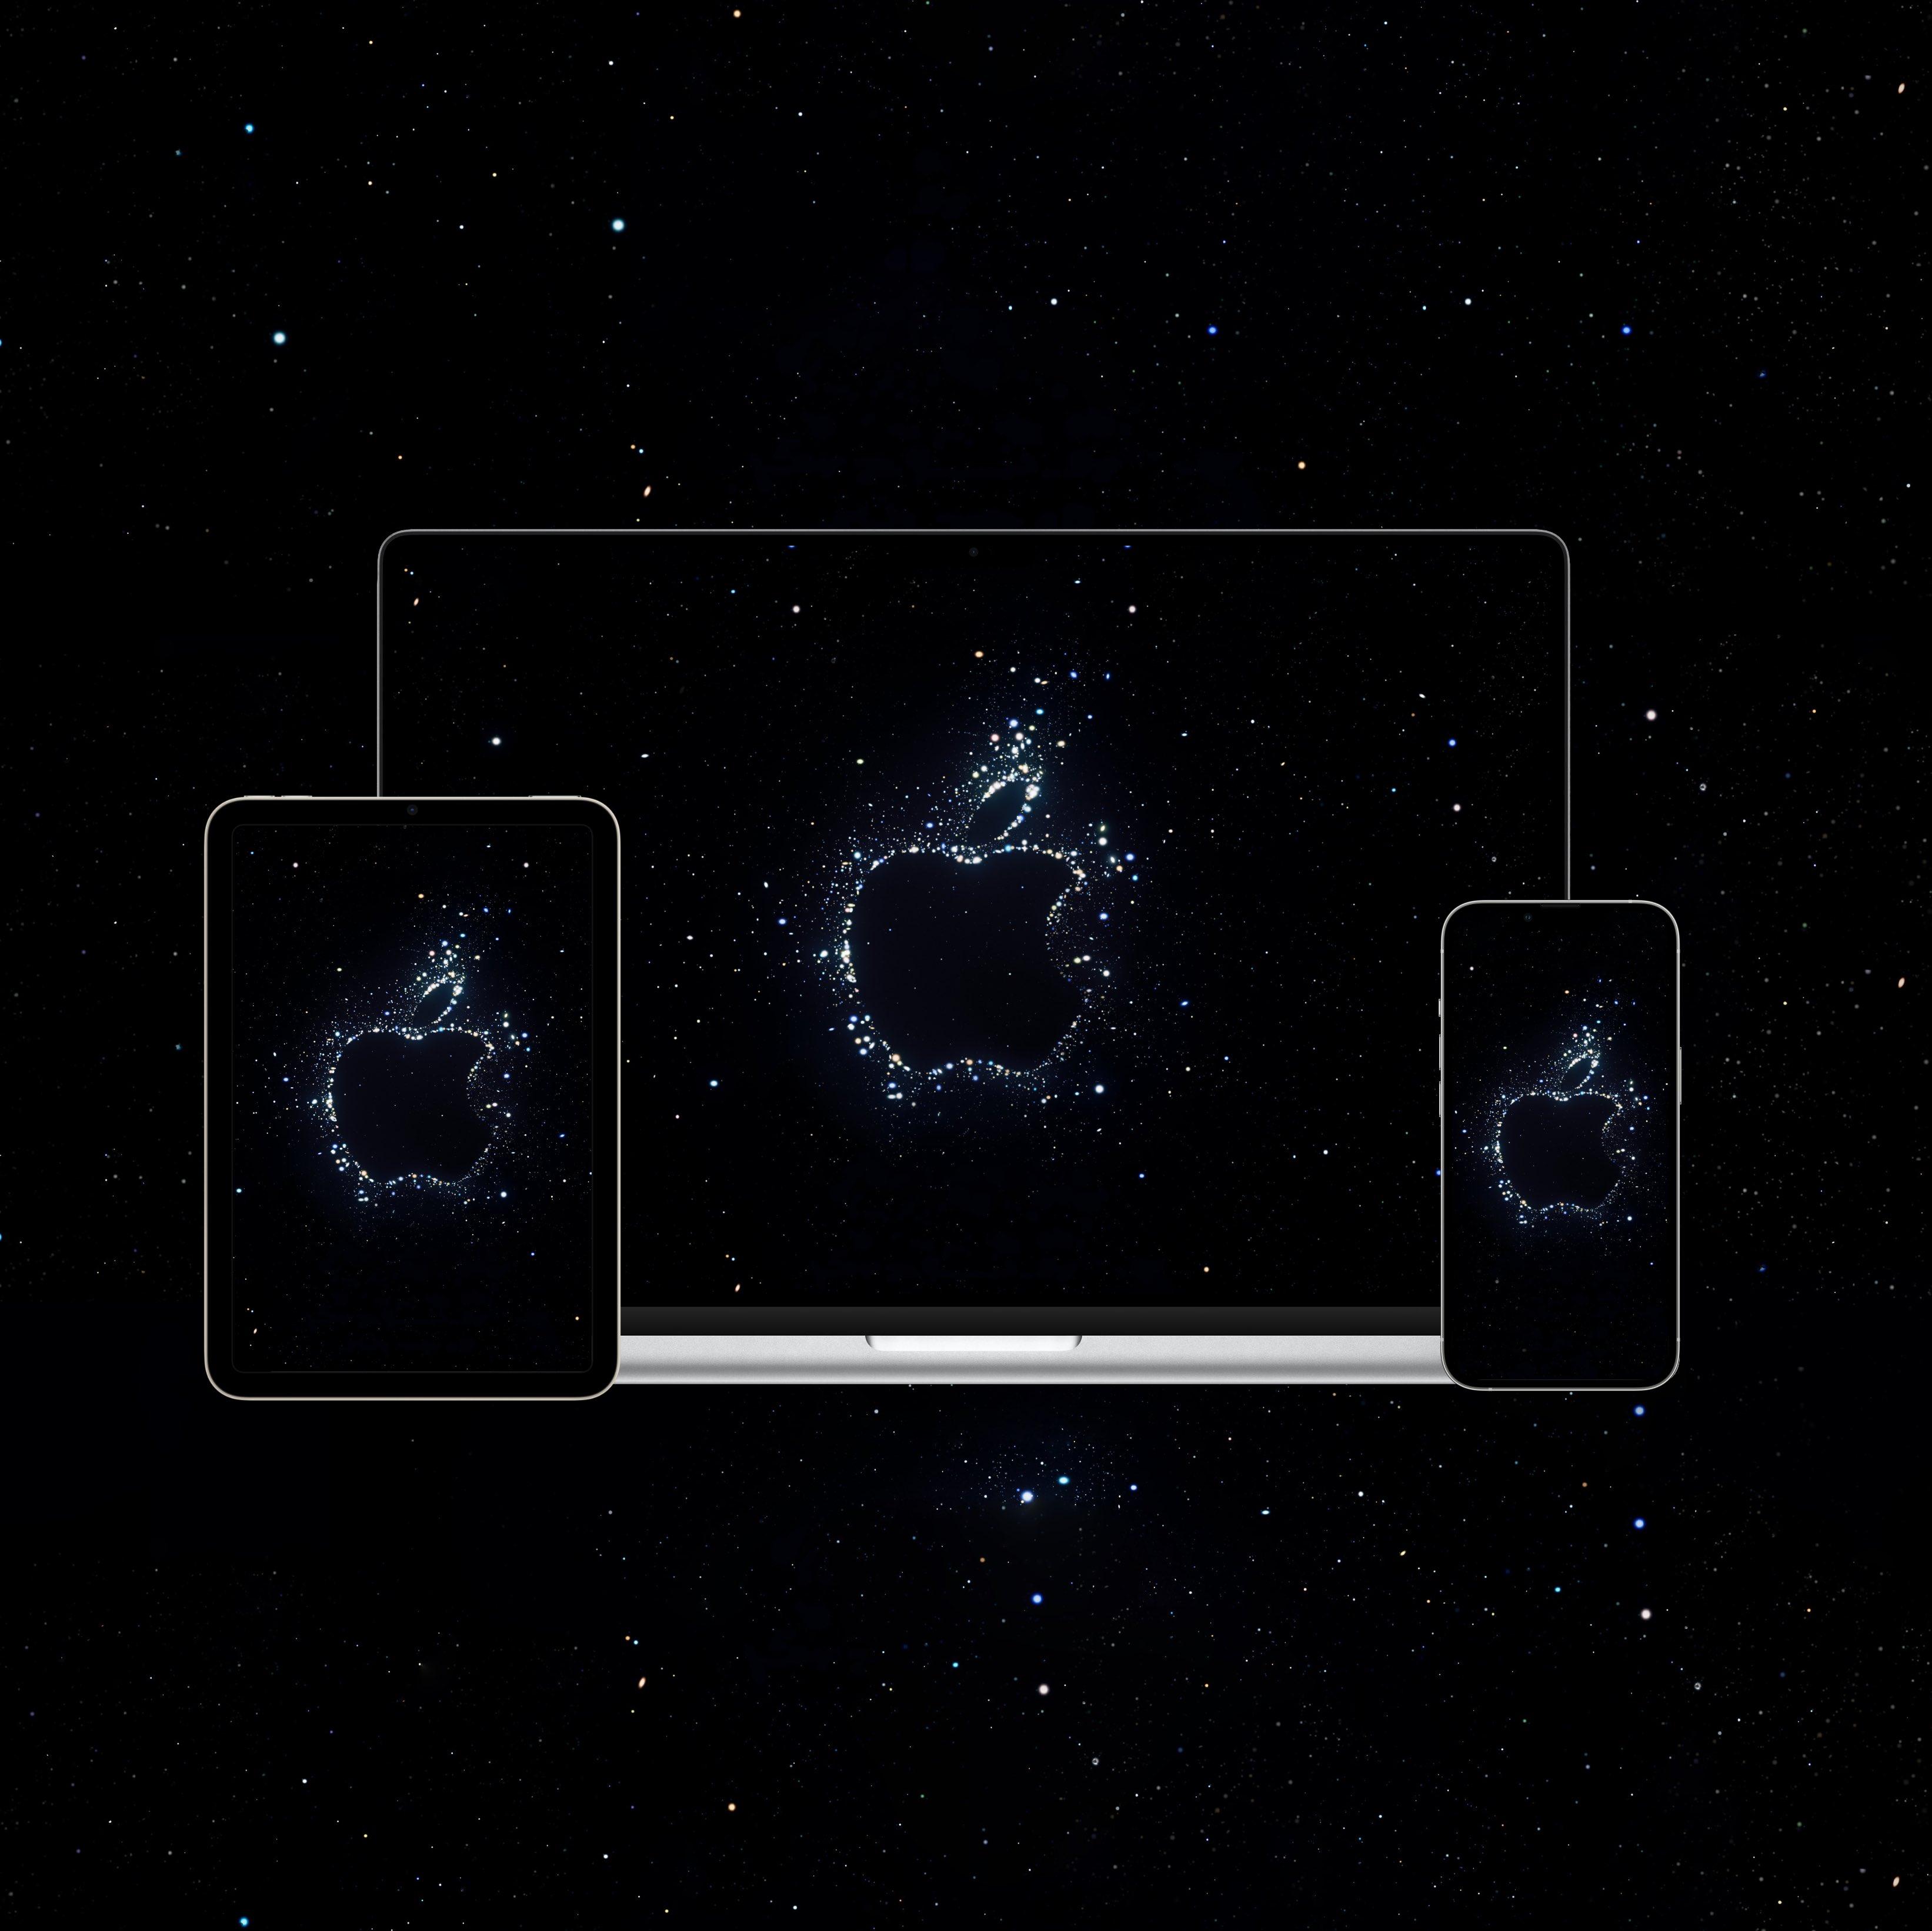 Apples Far out event wallpapers for your devices